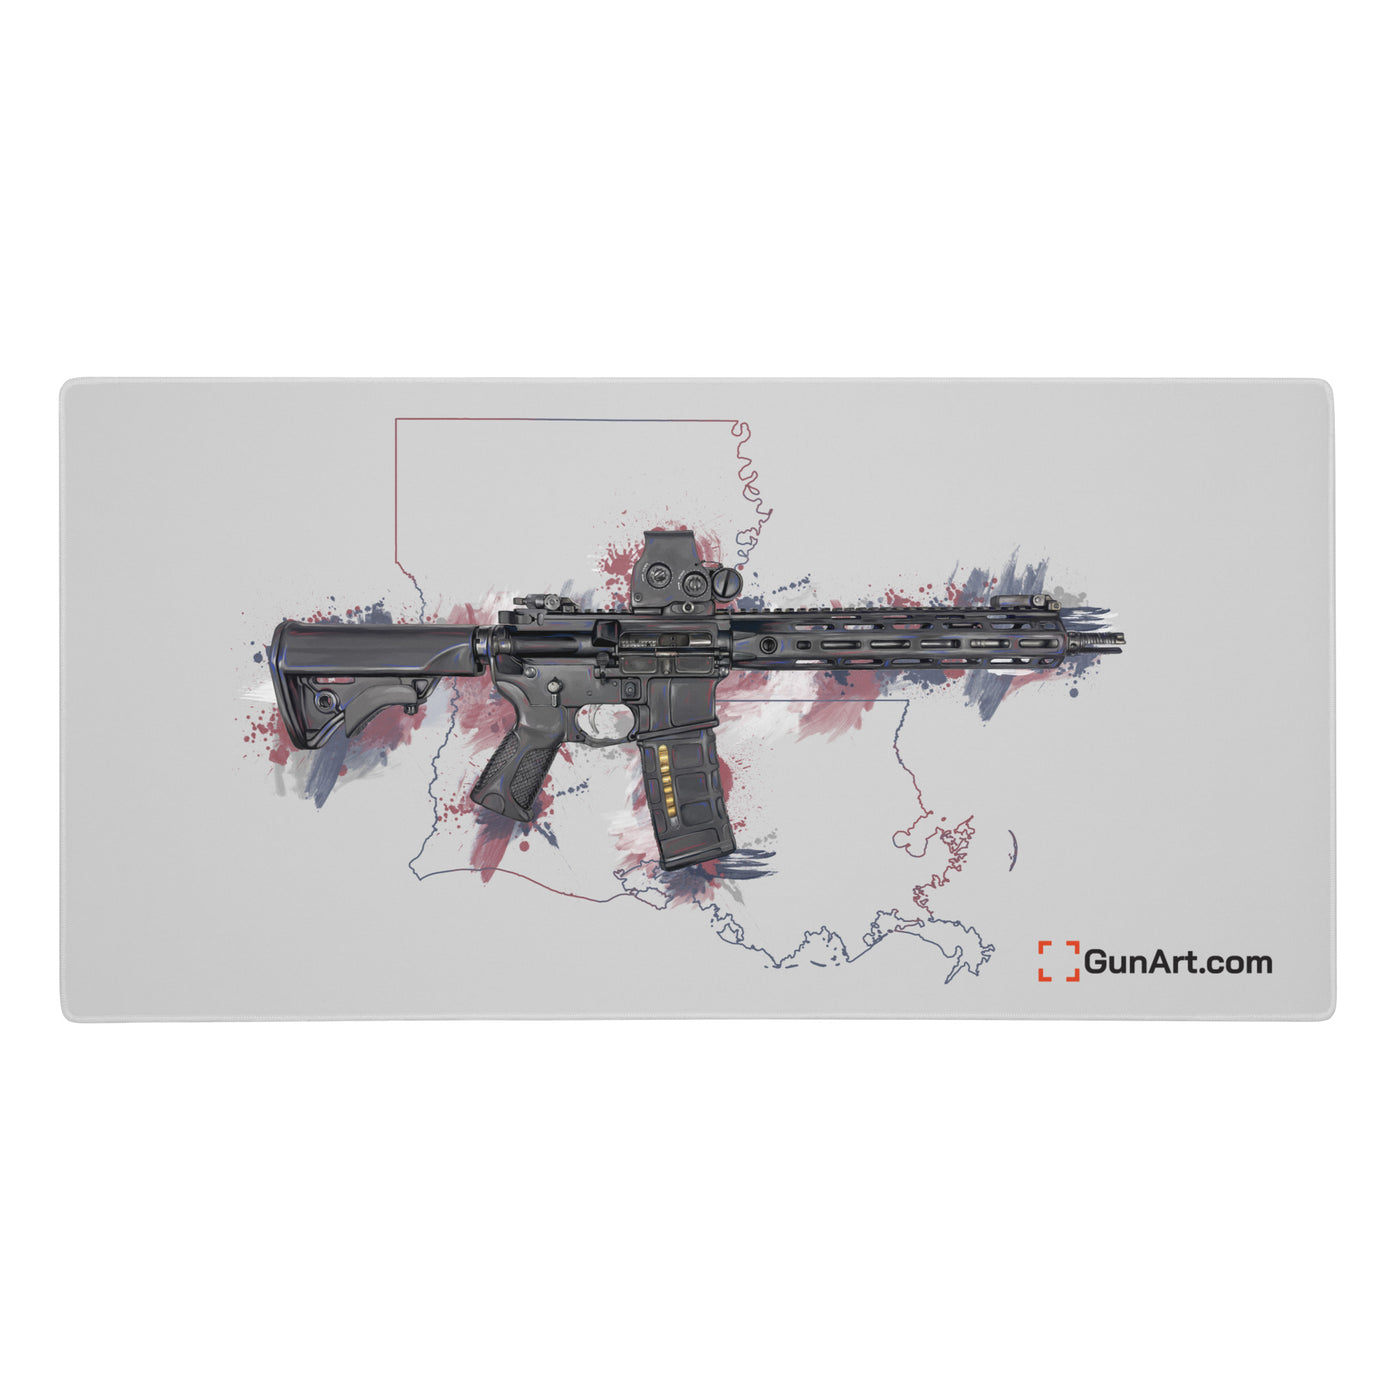 Defending Freedom - Louisiana - AR-15 State Gaming Mouse Pad - Colored State